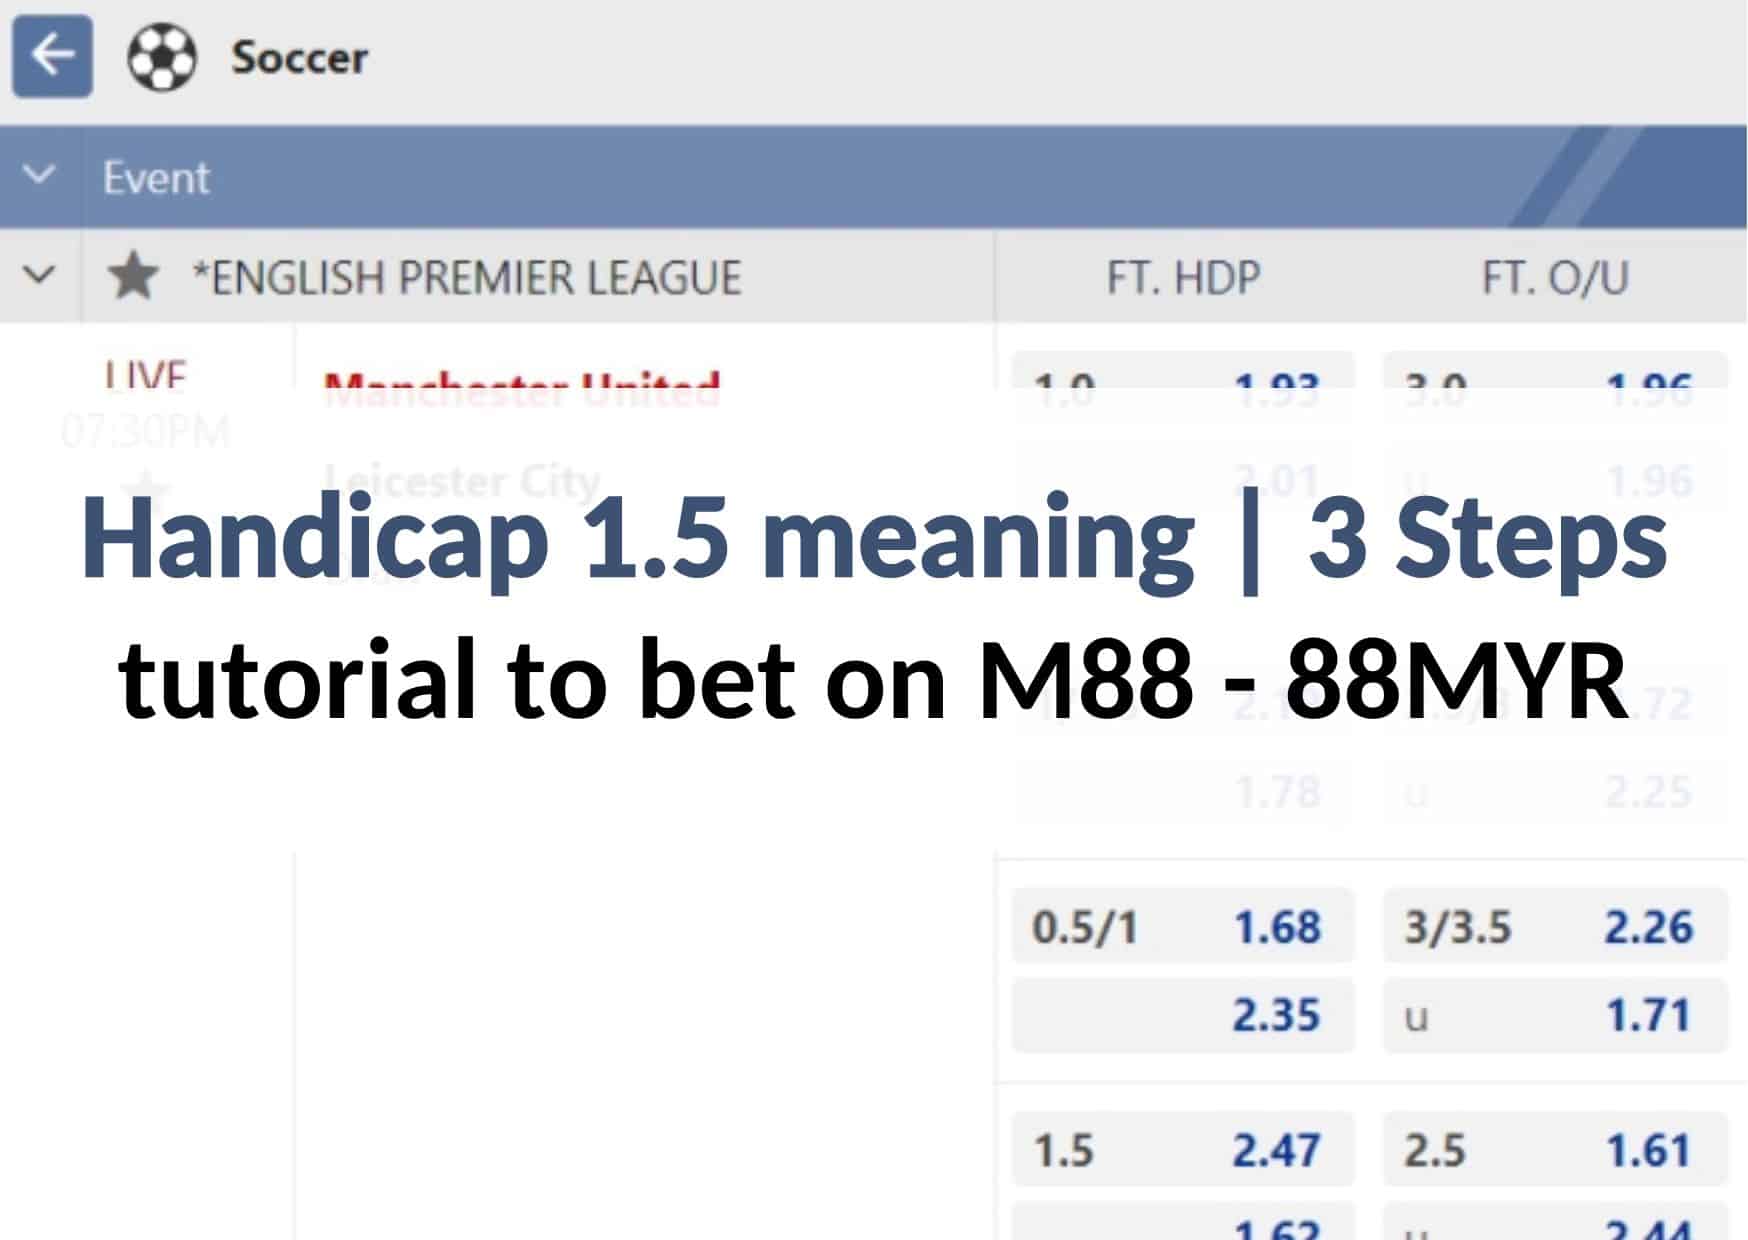 m88 football asian handicap 1 meaning featured image